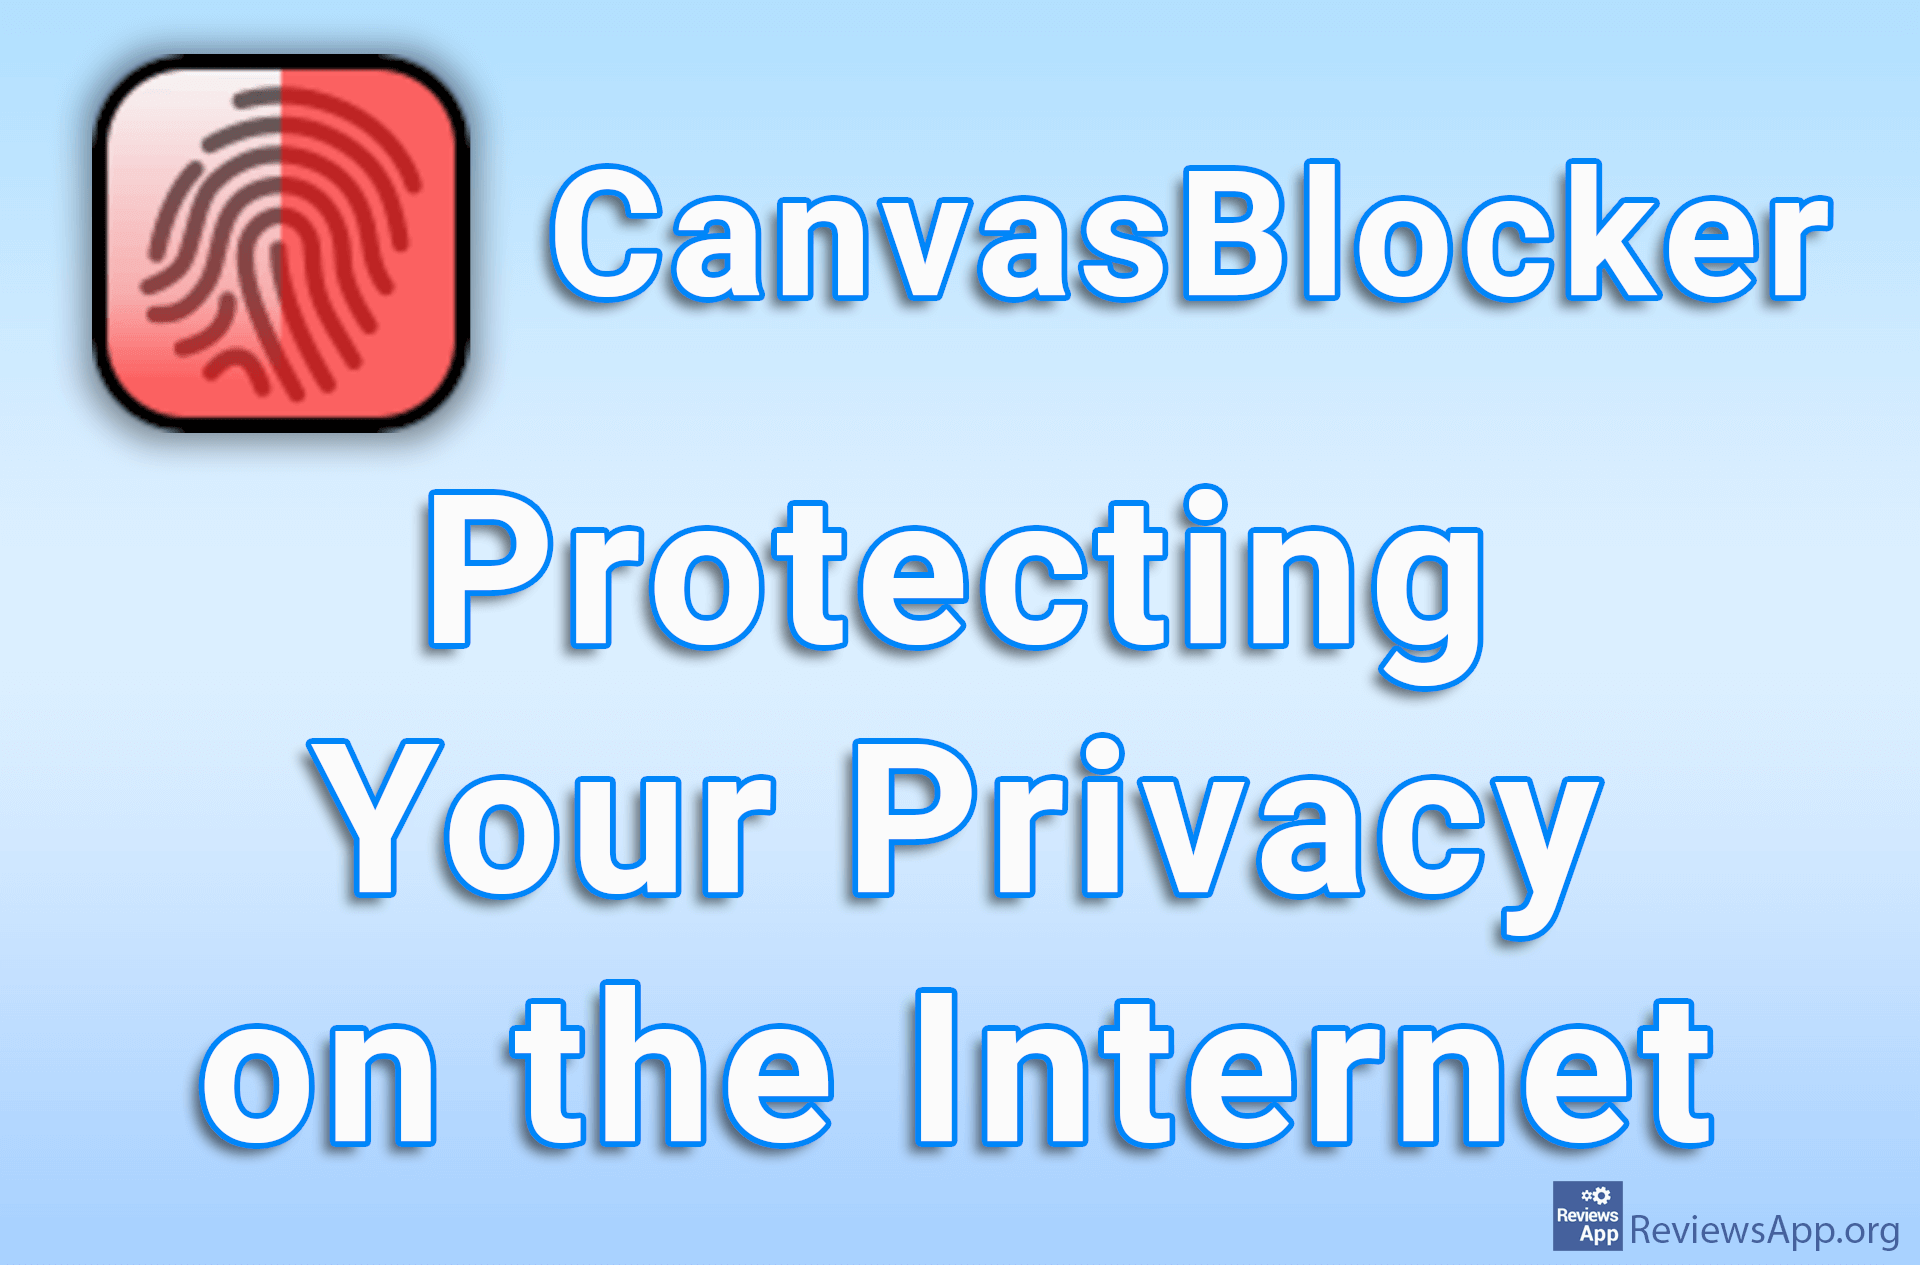 CanvasBlocker – Protecting Your Privacy on the Internet